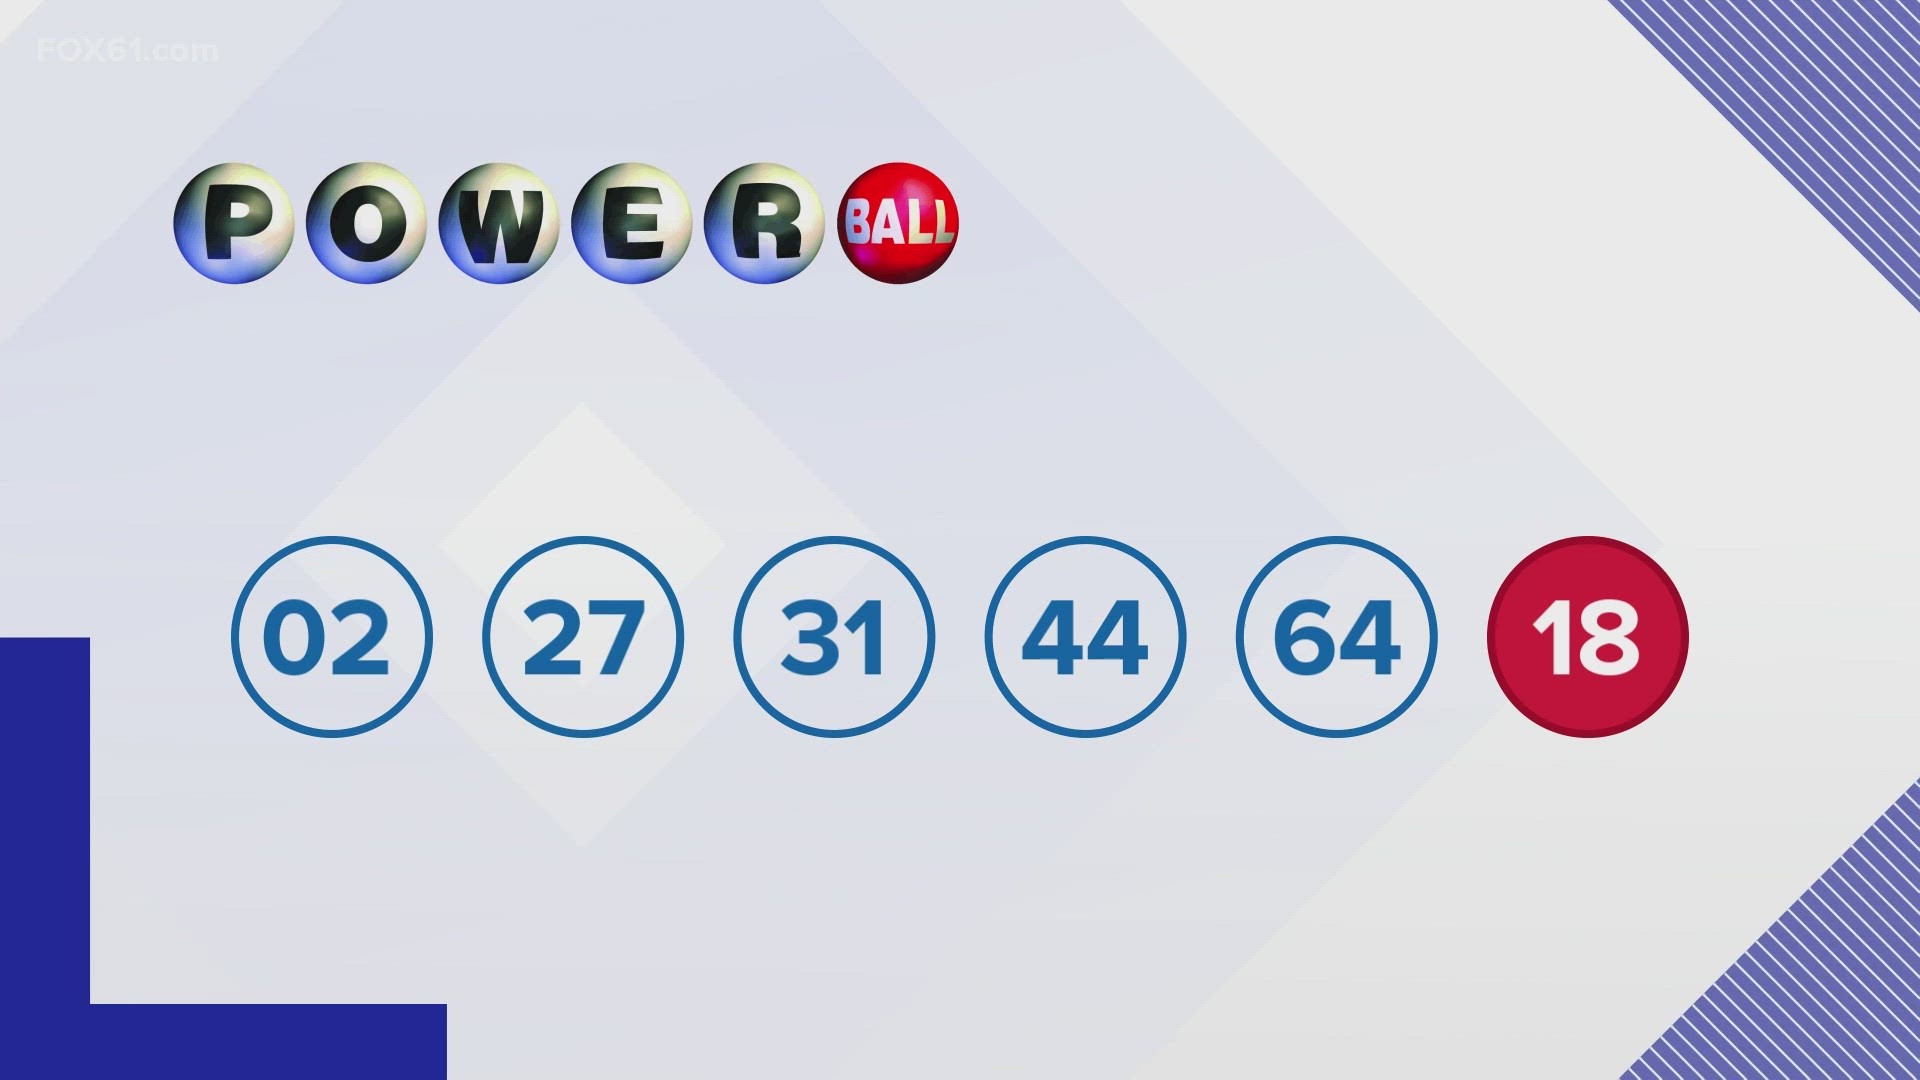 A $150,000 was won in Connecticut after Monday's Powerball drawing.